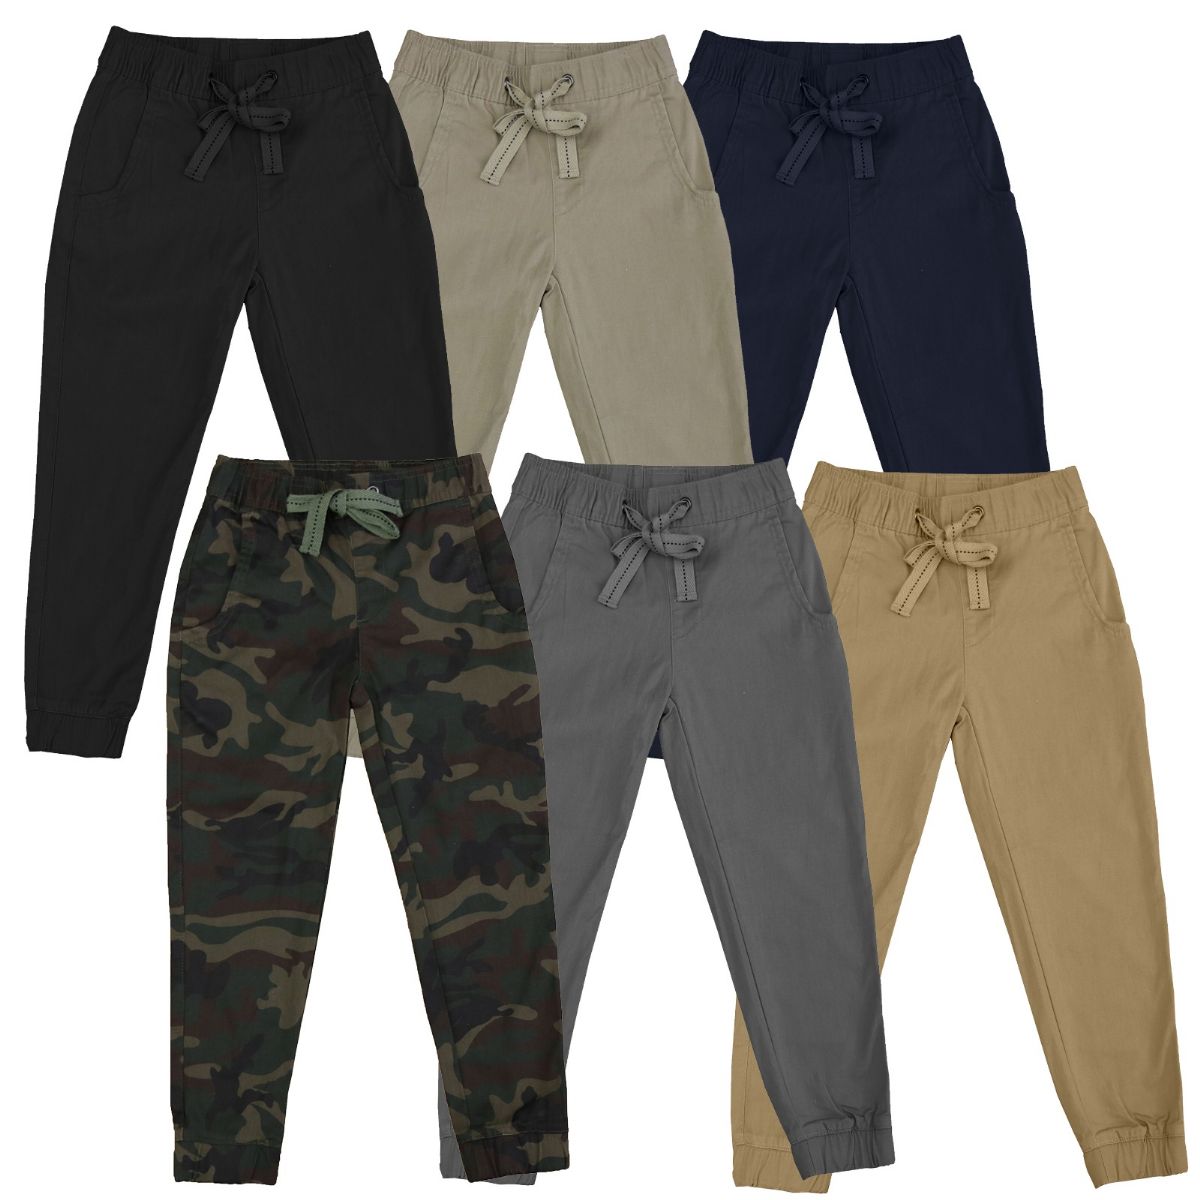 24 Pieces of Youth Boy Twill Jogger Pants In Assorted Colors Size M